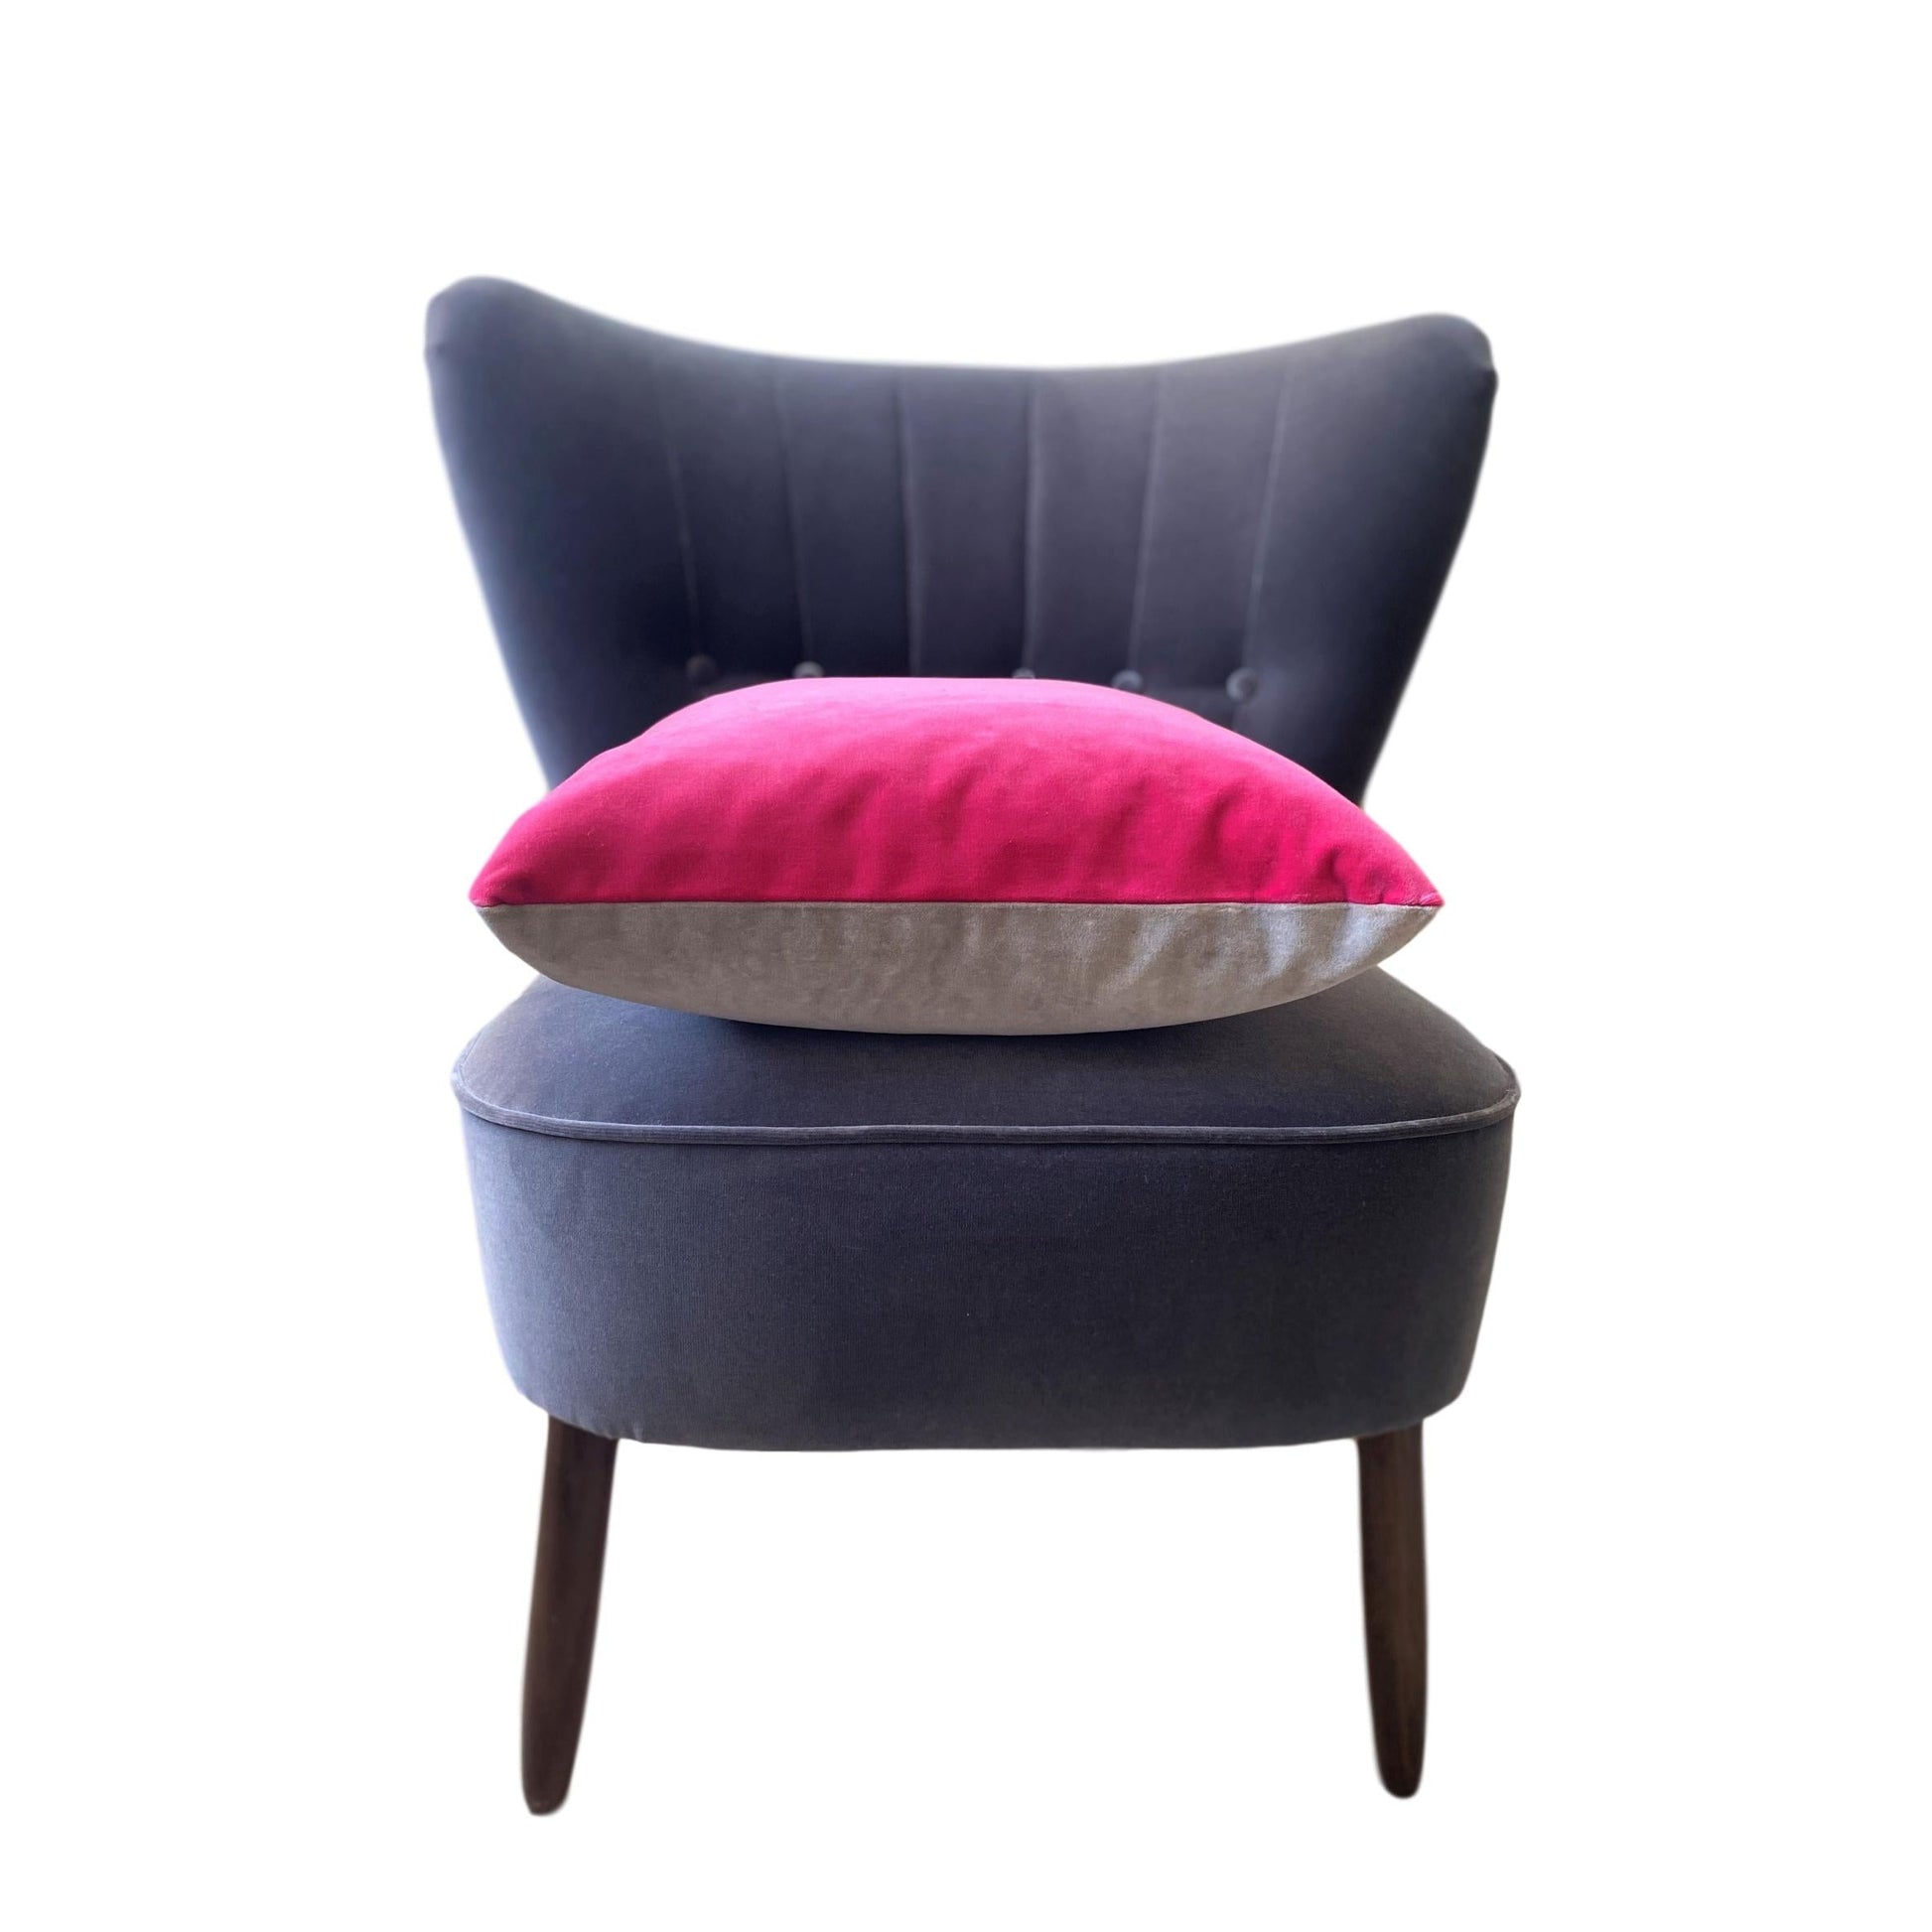 Grey fluffy cushion with bright pink by luxe 39